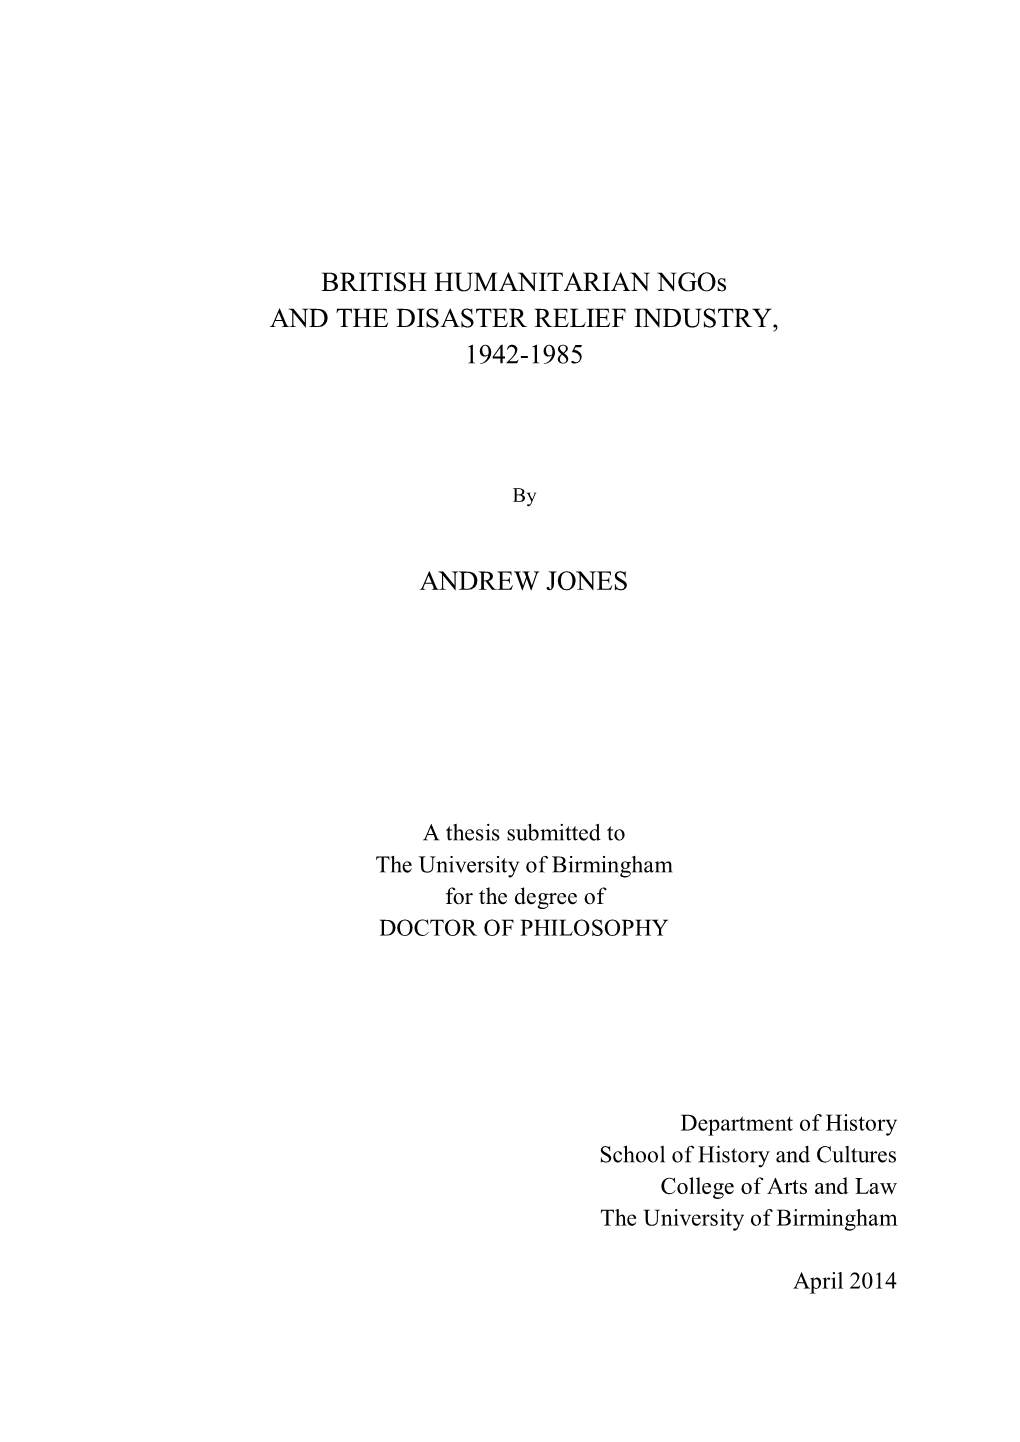 BRITISH HUMANITARIAN Ngos and the DISASTER RELIEF INDUSTRY, 1942-1985